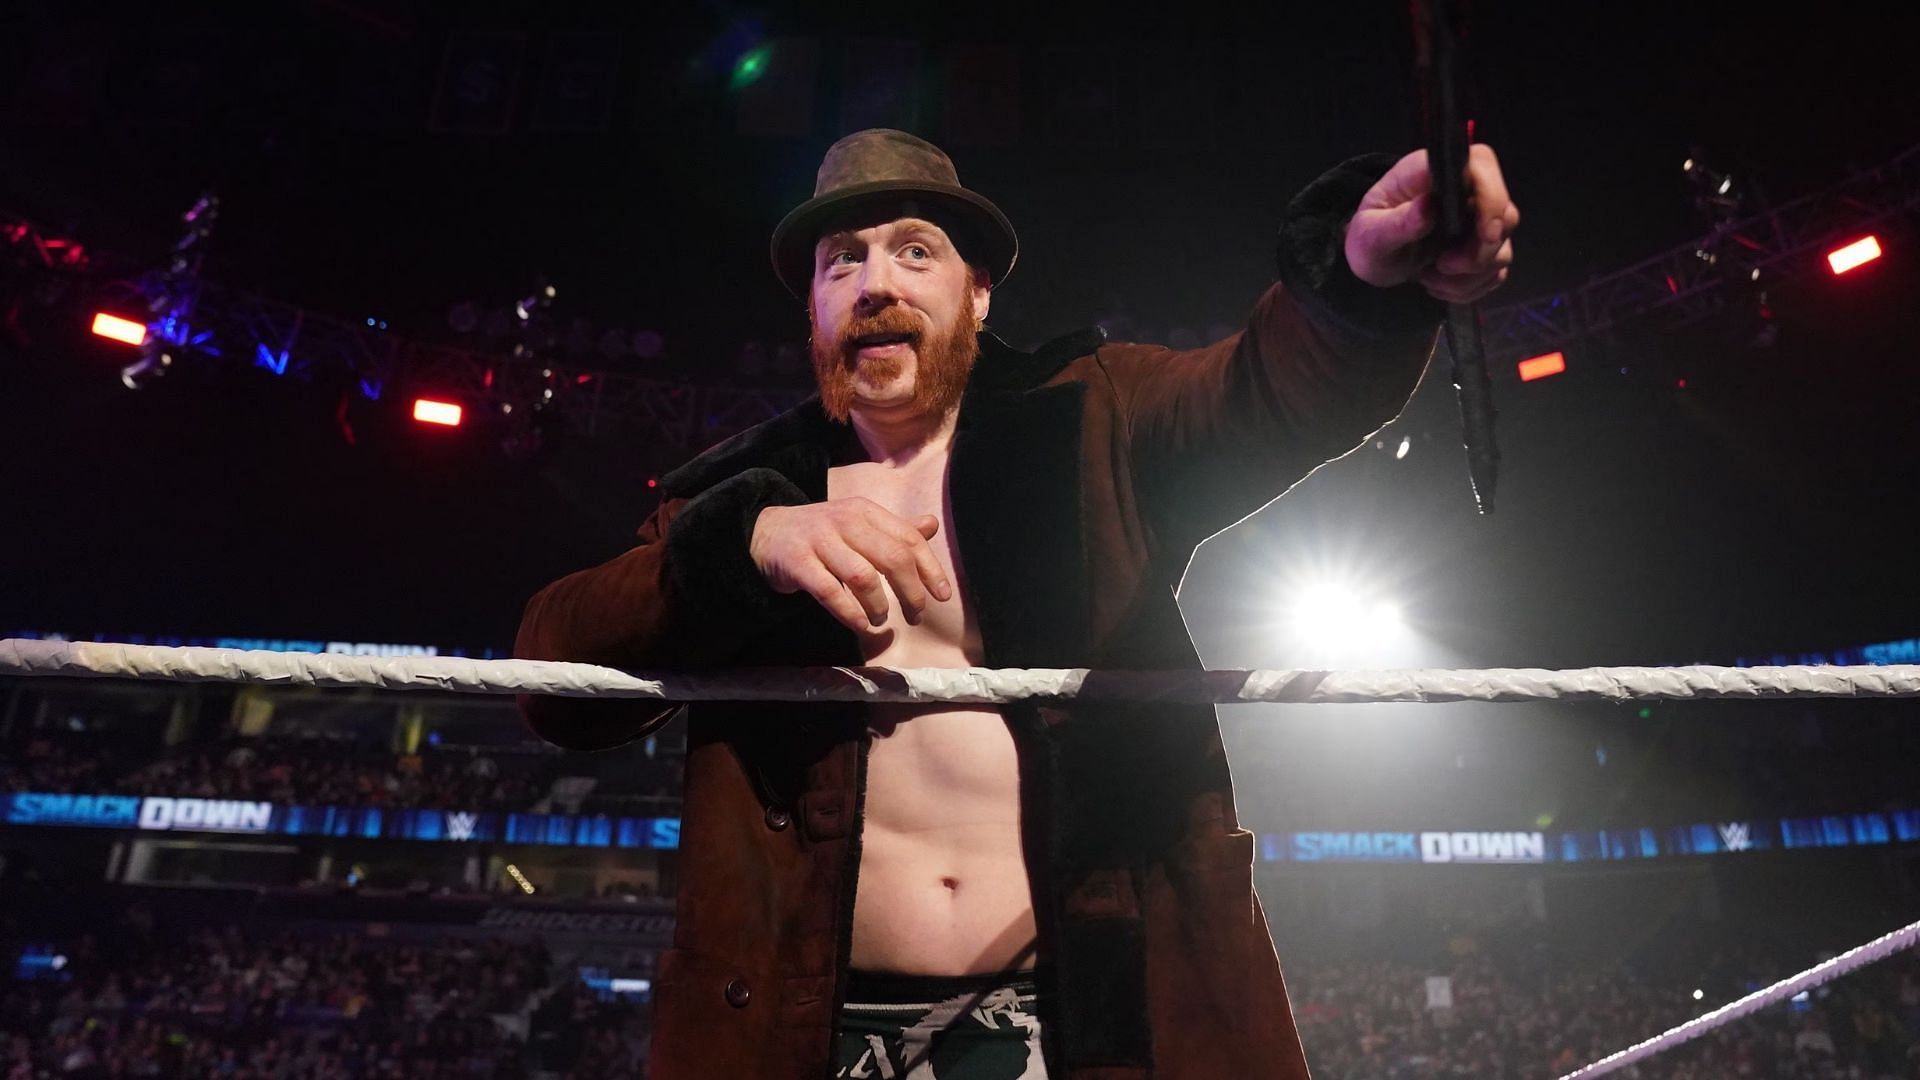 Future WWE Hall of Famer and SmackDown resident, Sheamus